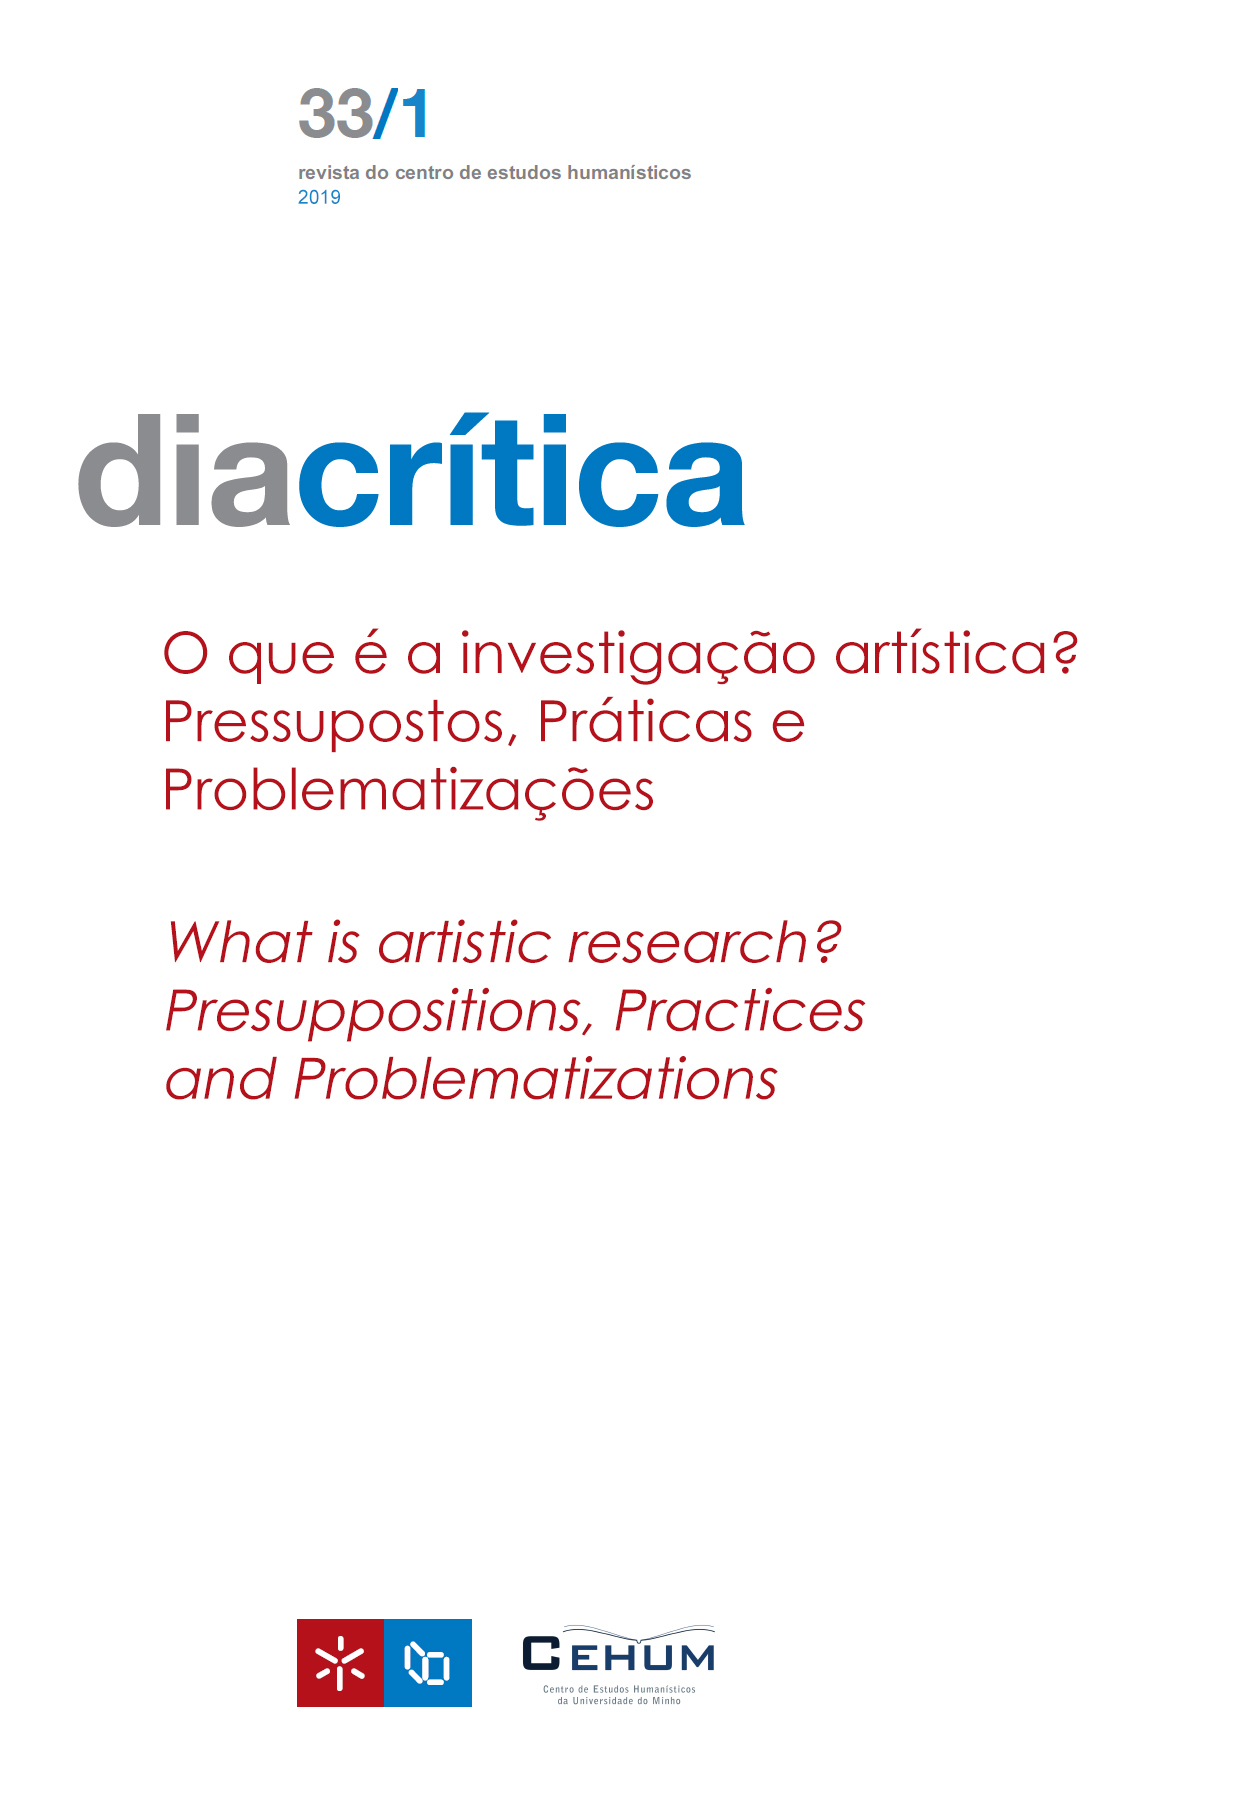 					View Vol. 33 No. 1 (2019): What is artistic research?: Presuppositions, Practices and Problematizations
				